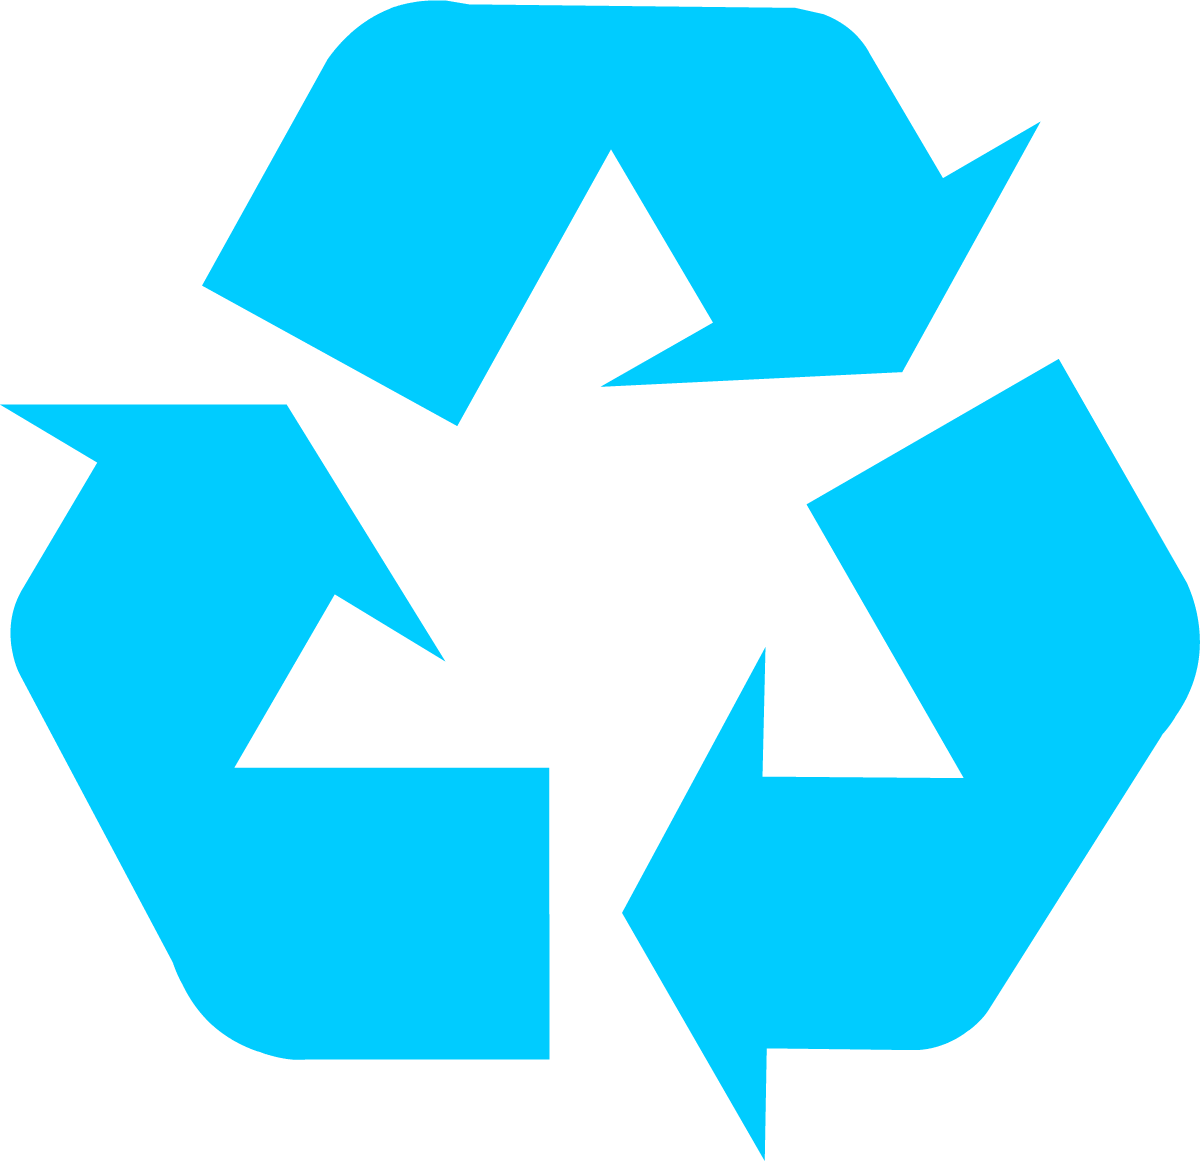 Green Recycle Logo - Recycling Symbol - Download the Original Recycle Logo